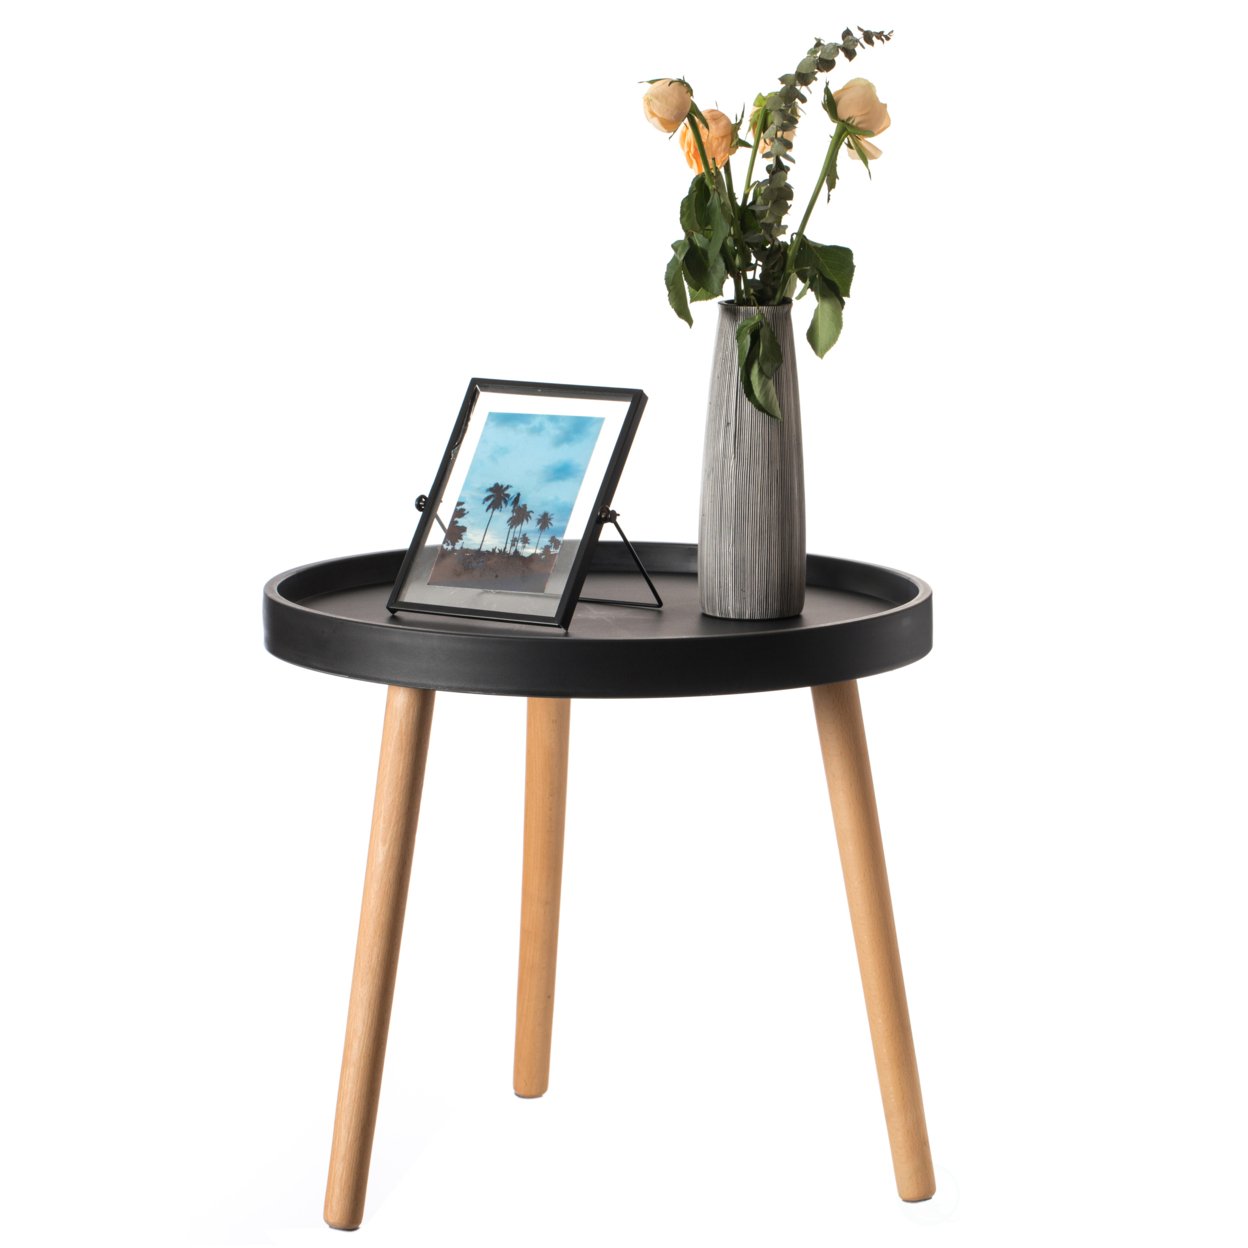 Modern Plastic Round Side Table Accent Coffee Table With Beech Wood Legs - Black